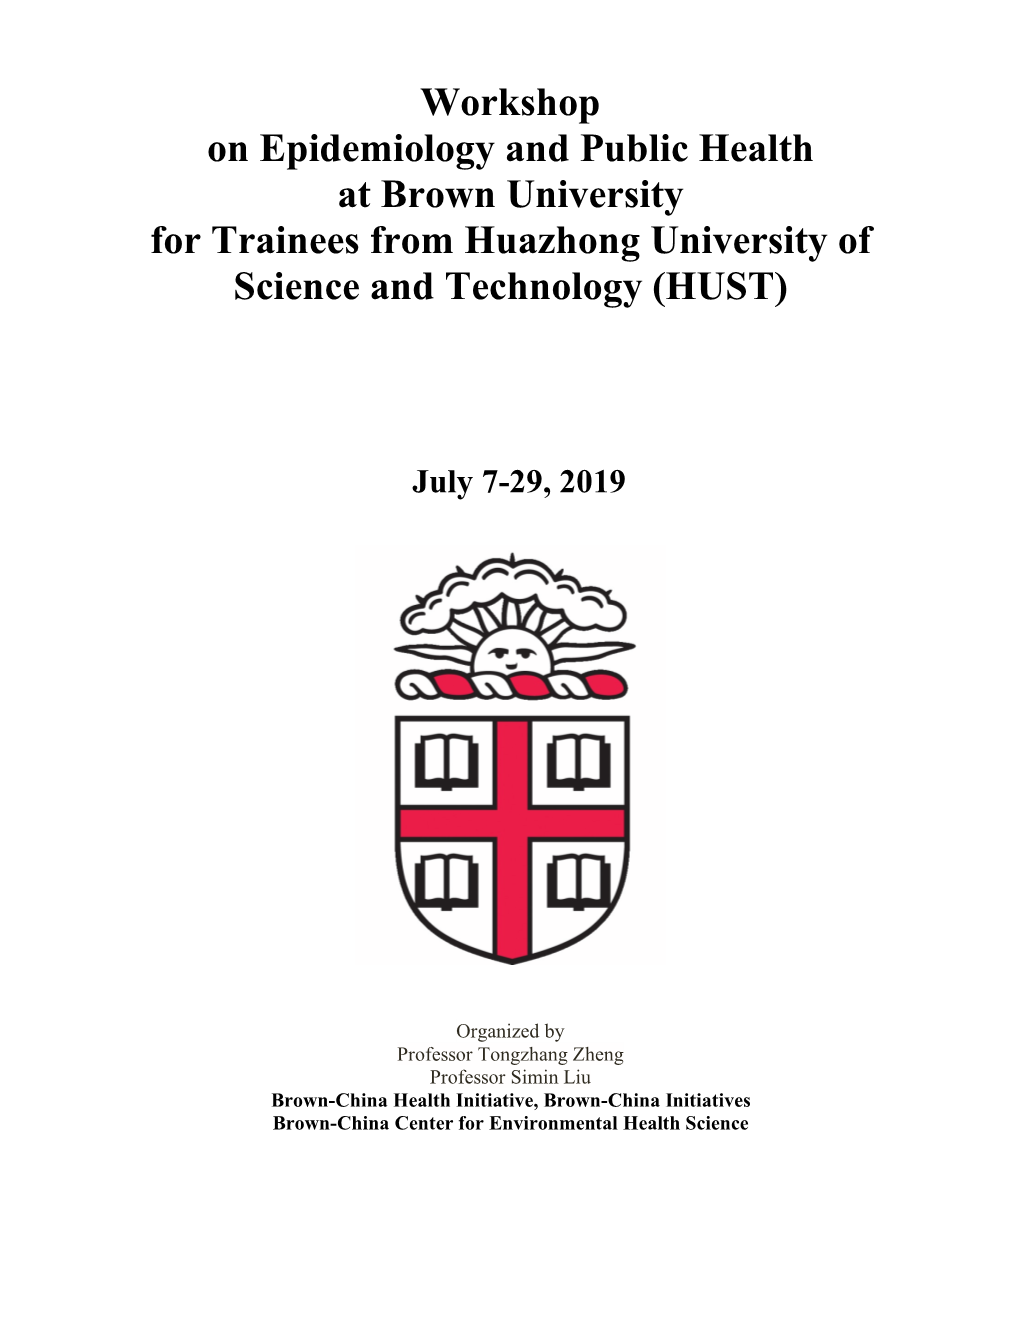 Workshop on Epidemiology and Public Health at Brown University for Trainees from Huazhong University of Science and Technology (HUST)